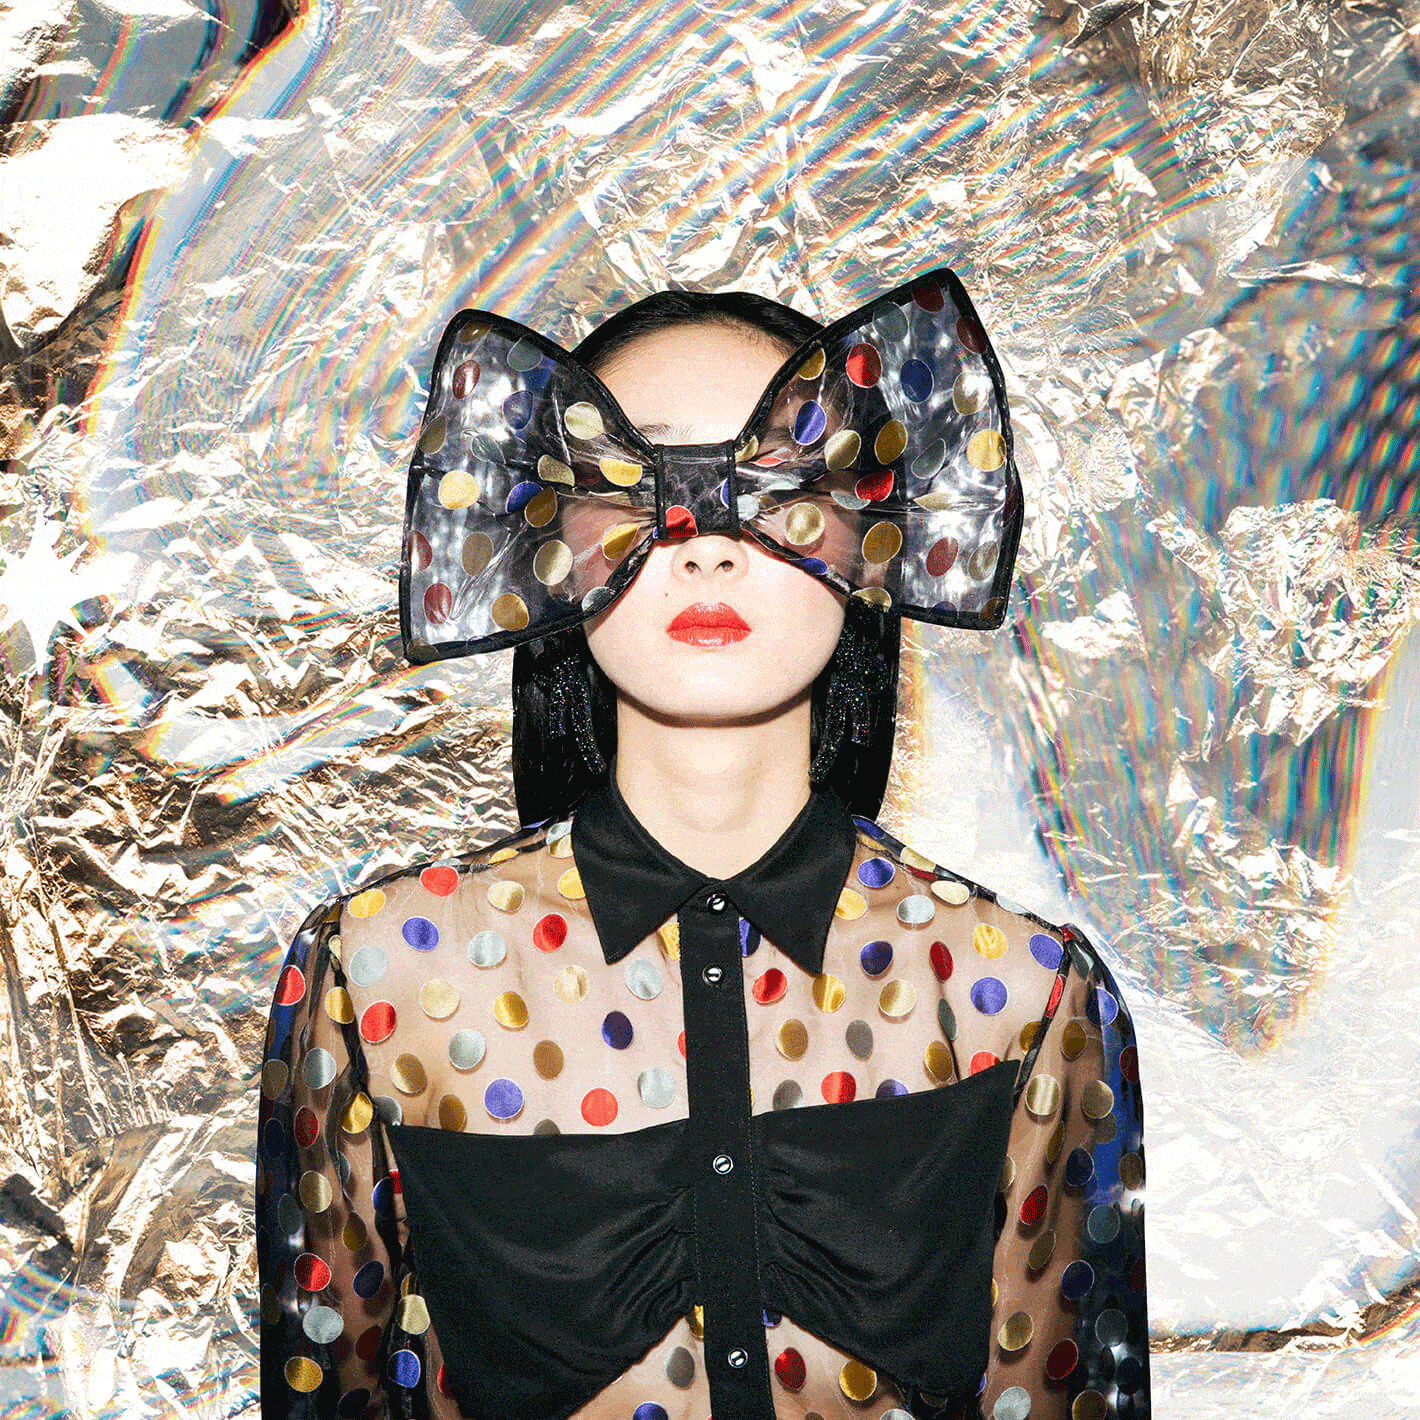 glitch artwork of woman in bold spotted dress and bow headpiece over her eyes